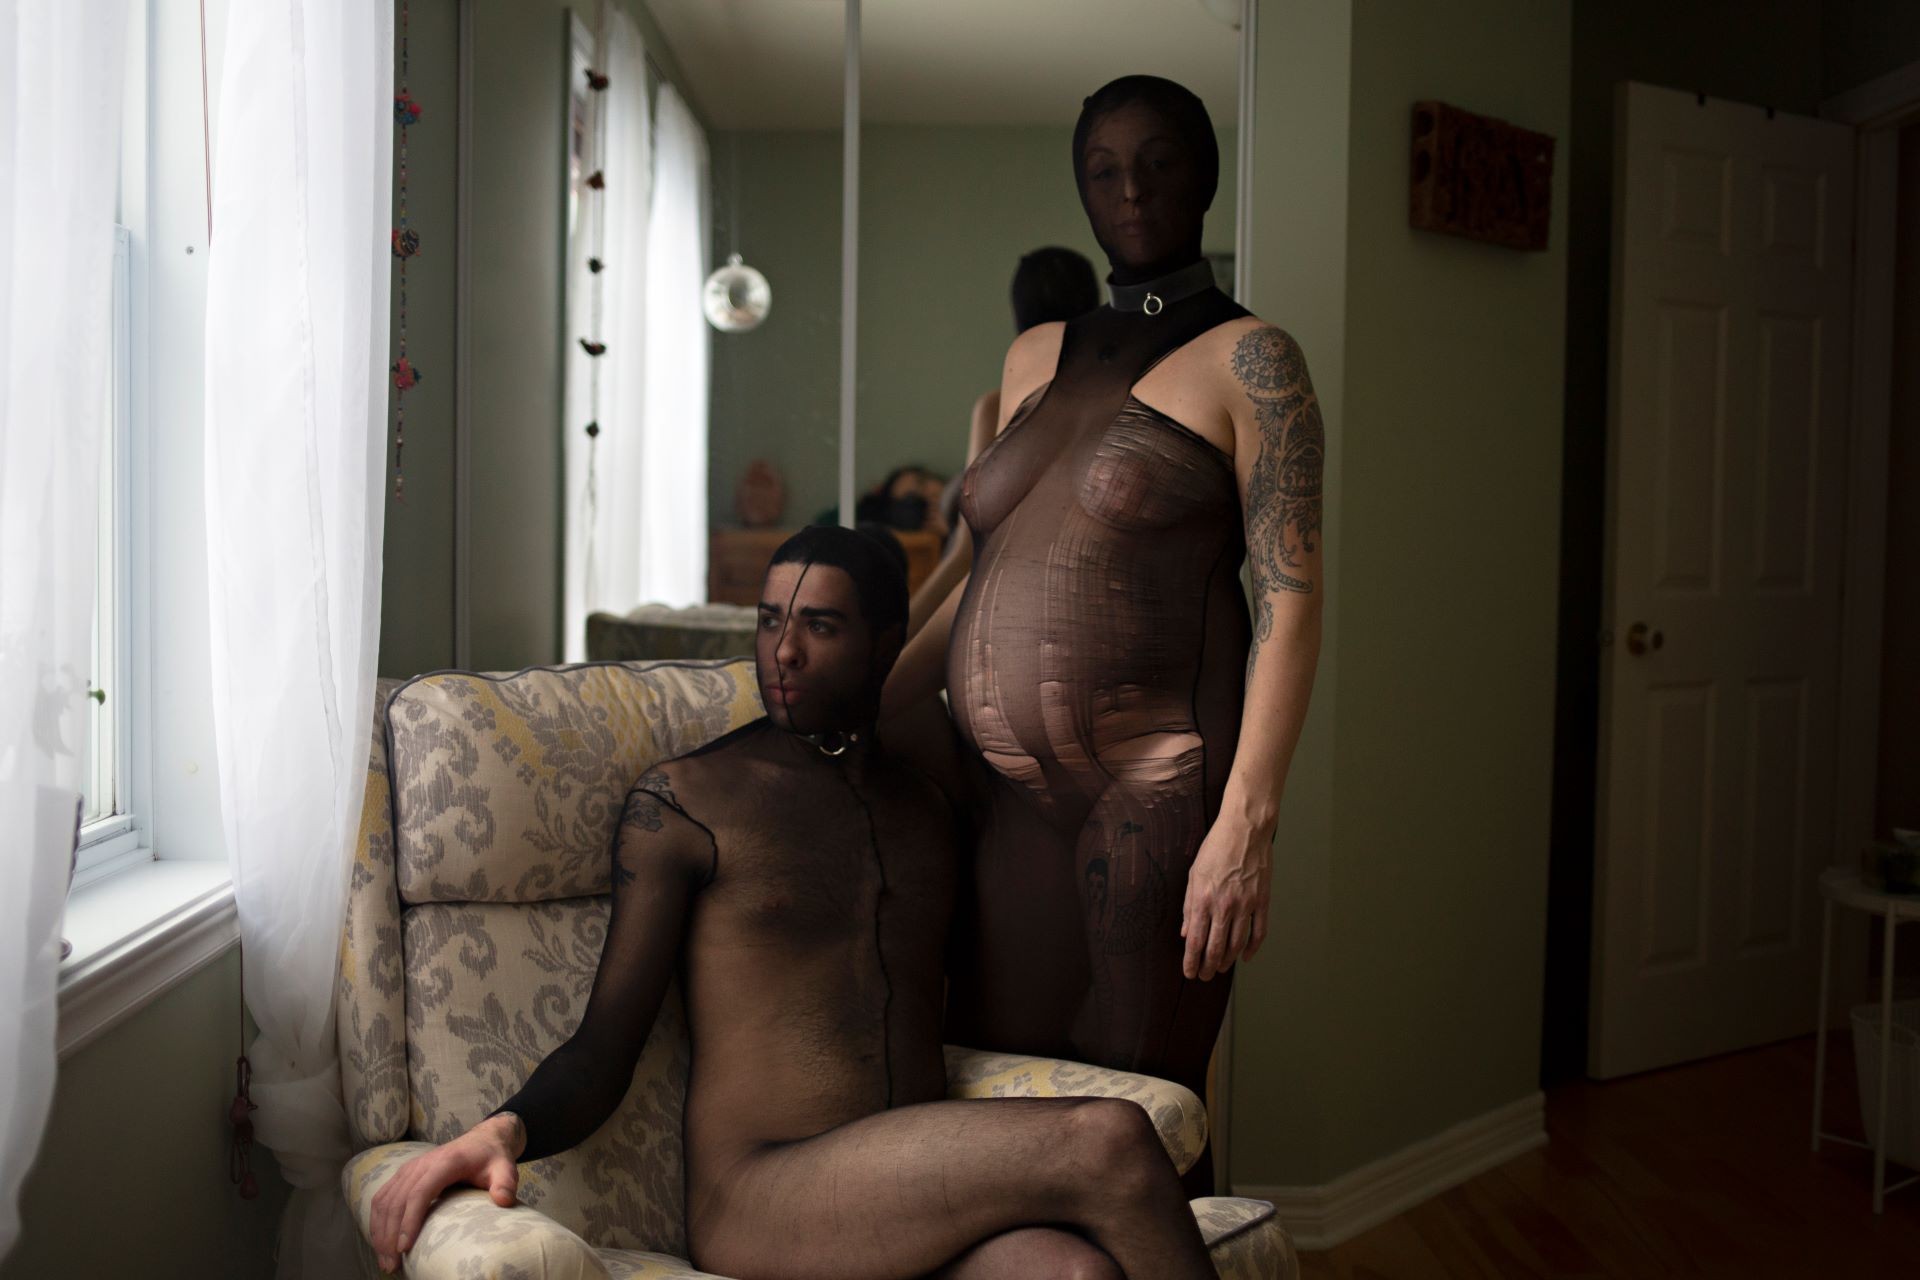 A queer couple posing in their living room dressed in a sheer black bdsm outfit with their face covered, one is pregnant and standing next to a male presenting companion sitting in a armchair